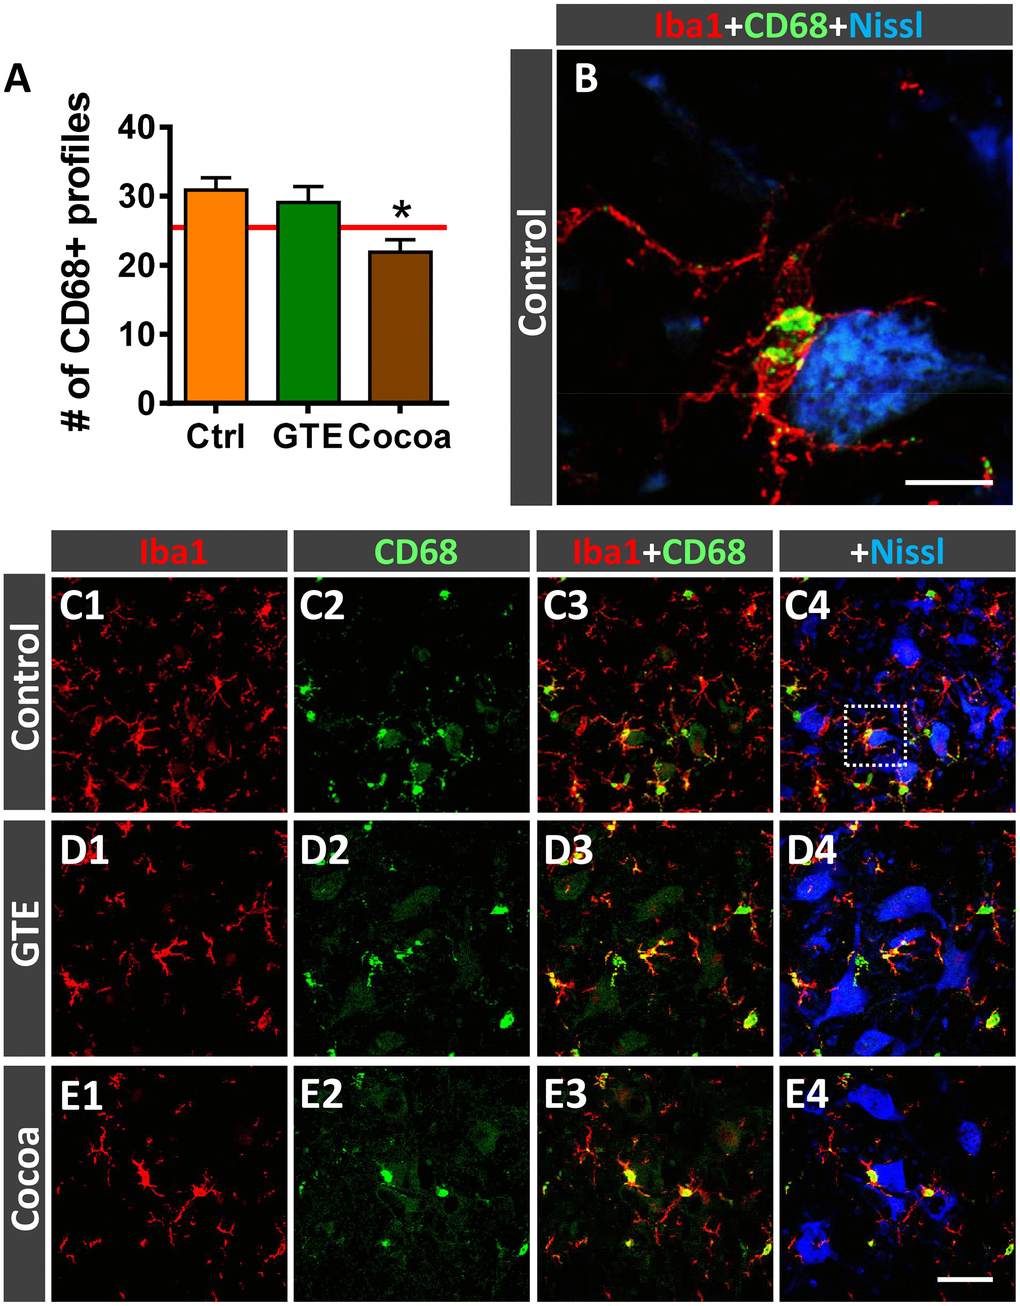 Impact of GTE- and cocoa-supplemented diets on microglial activation in ventral horn spinal cord of old mice. Sections of lumbar spinal cords from mice of different experimental groups were double immunostained for Iba1 and CD68, a marker of activated phagocytic microglia. (A) Quantification of CD68-positive profiles around MNs in control, GTE and cocoa groups. (B–E4) Representative confocal micrographs used for data analysis showing CD68 (green) in combination with Iba1 (red) and fluorescent Nissl staining (blue, for MN visualization), as indicated in panels. A higher magnification of area delimited by the dashed square in C4 is shown in (B). Data in the graph are expressed as the mean ± SEM; a total of 40-50 images per experimental group were analyzed (number of animals per group: control [Ctrl] = 3, GTE = 4, cocoa = 5). *p post hoc test). Scale bar: 10 μm in (C) and 50 μm in (E4) (valid for C1–E3).